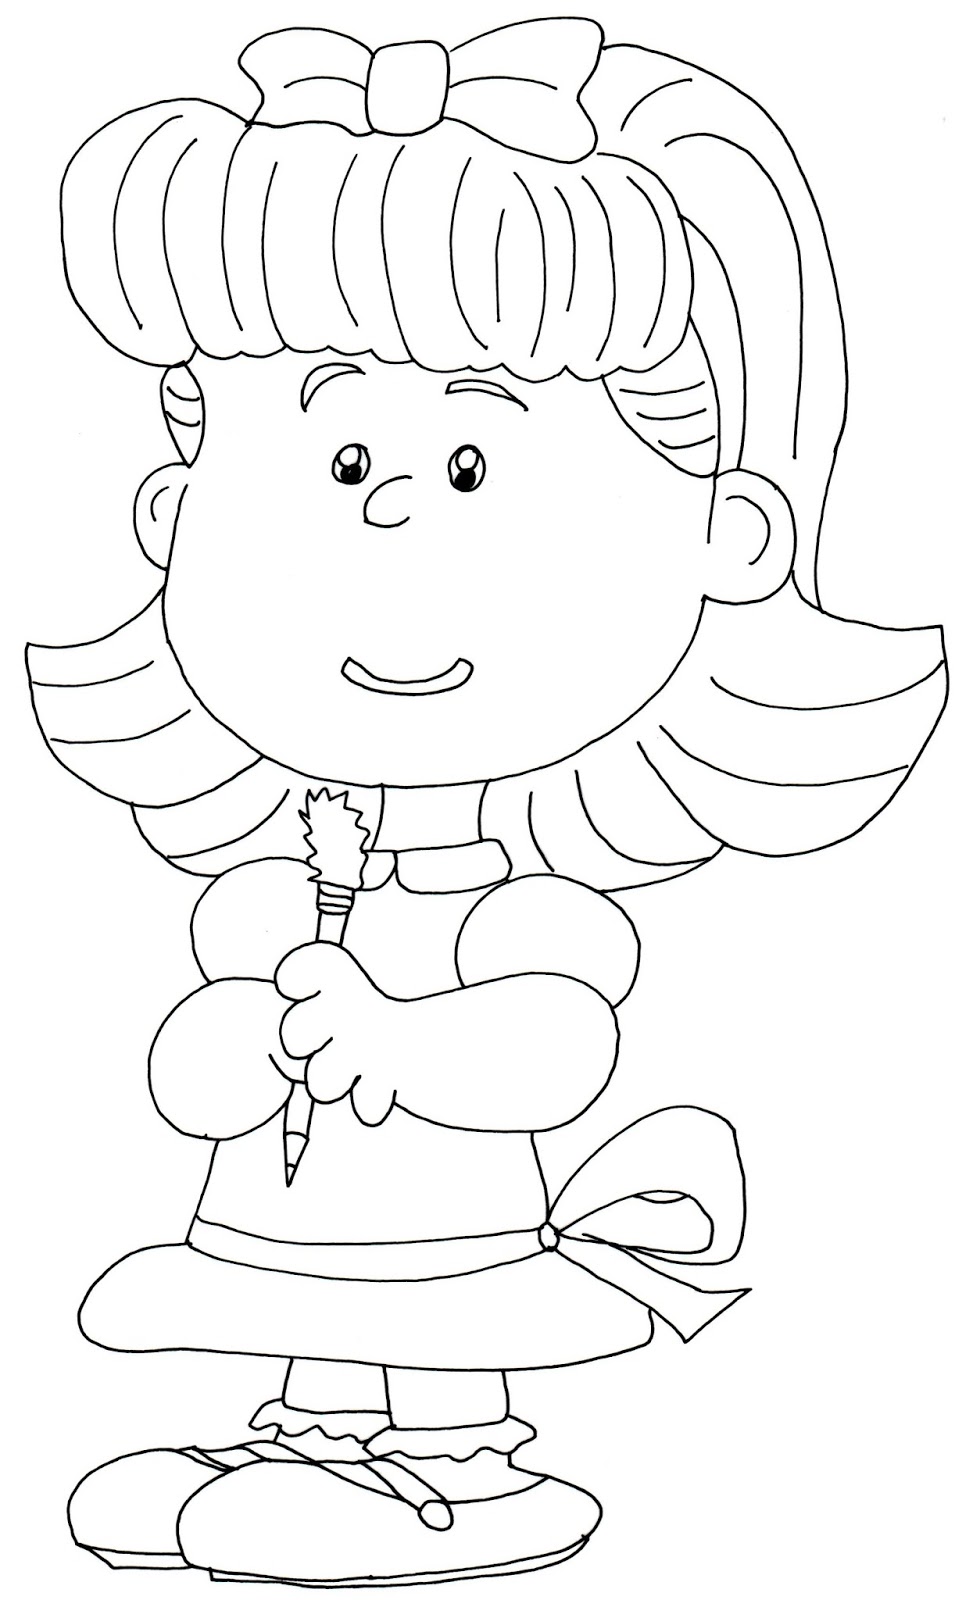 Peanuts Coloring Pages at GetColorings.com | Free printable colorings